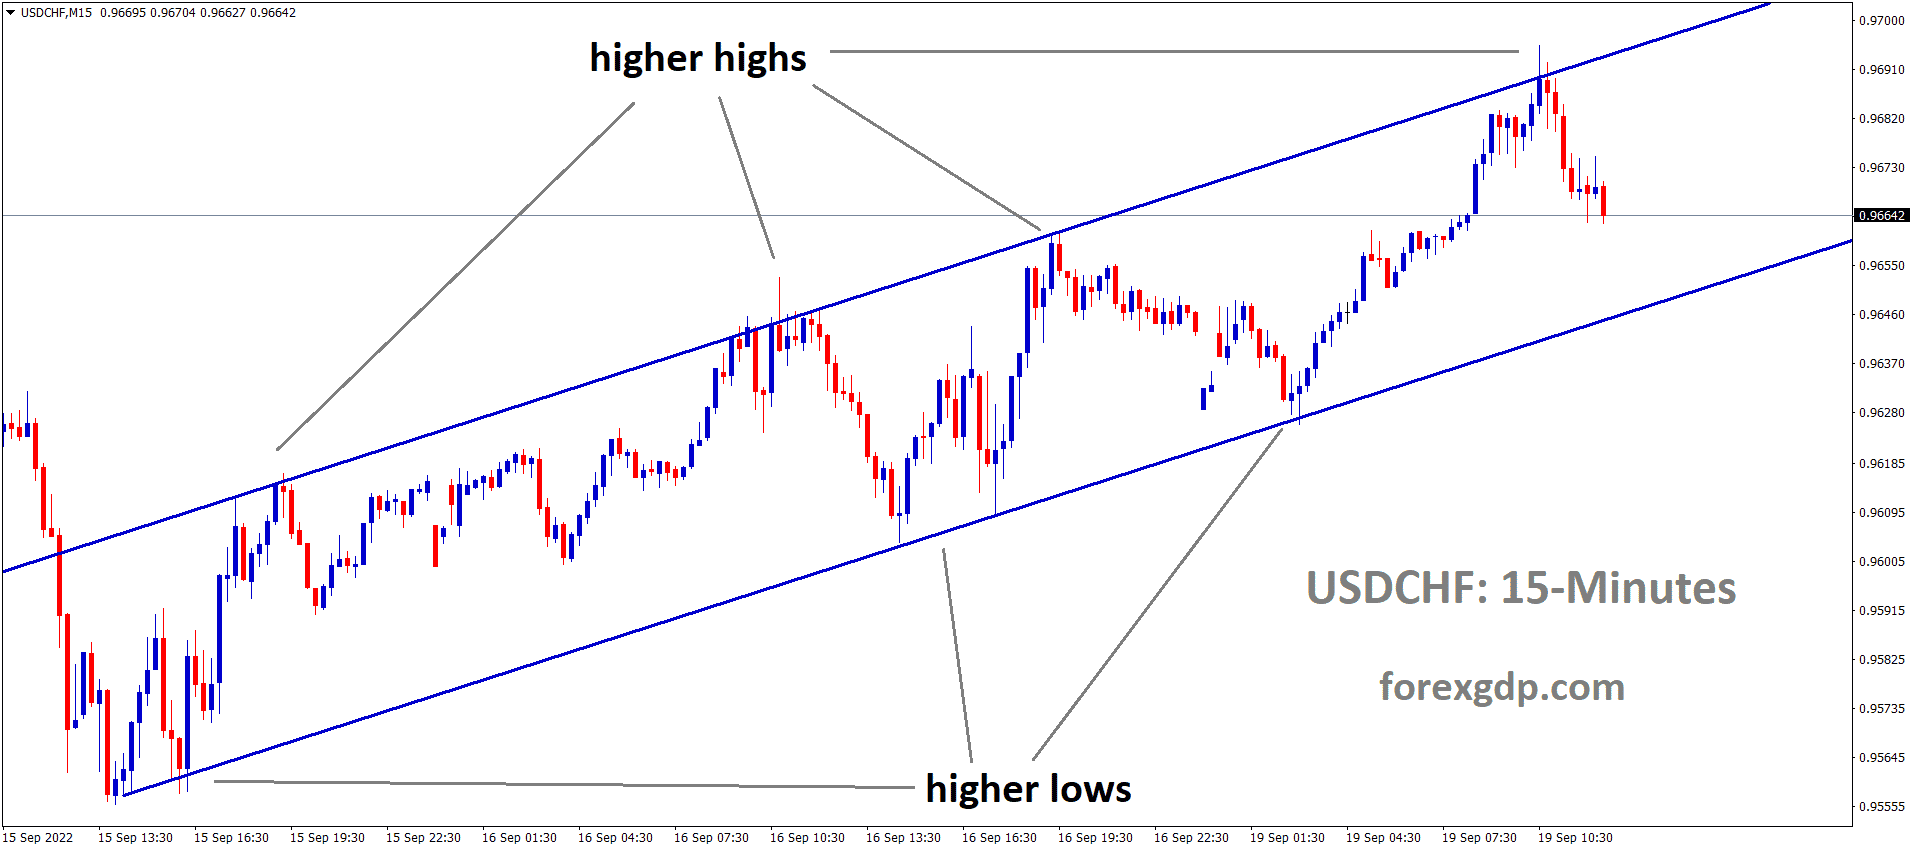 USDCHF is moving in an Ascending channel and the market has fallen from the higher high area of the channel 2